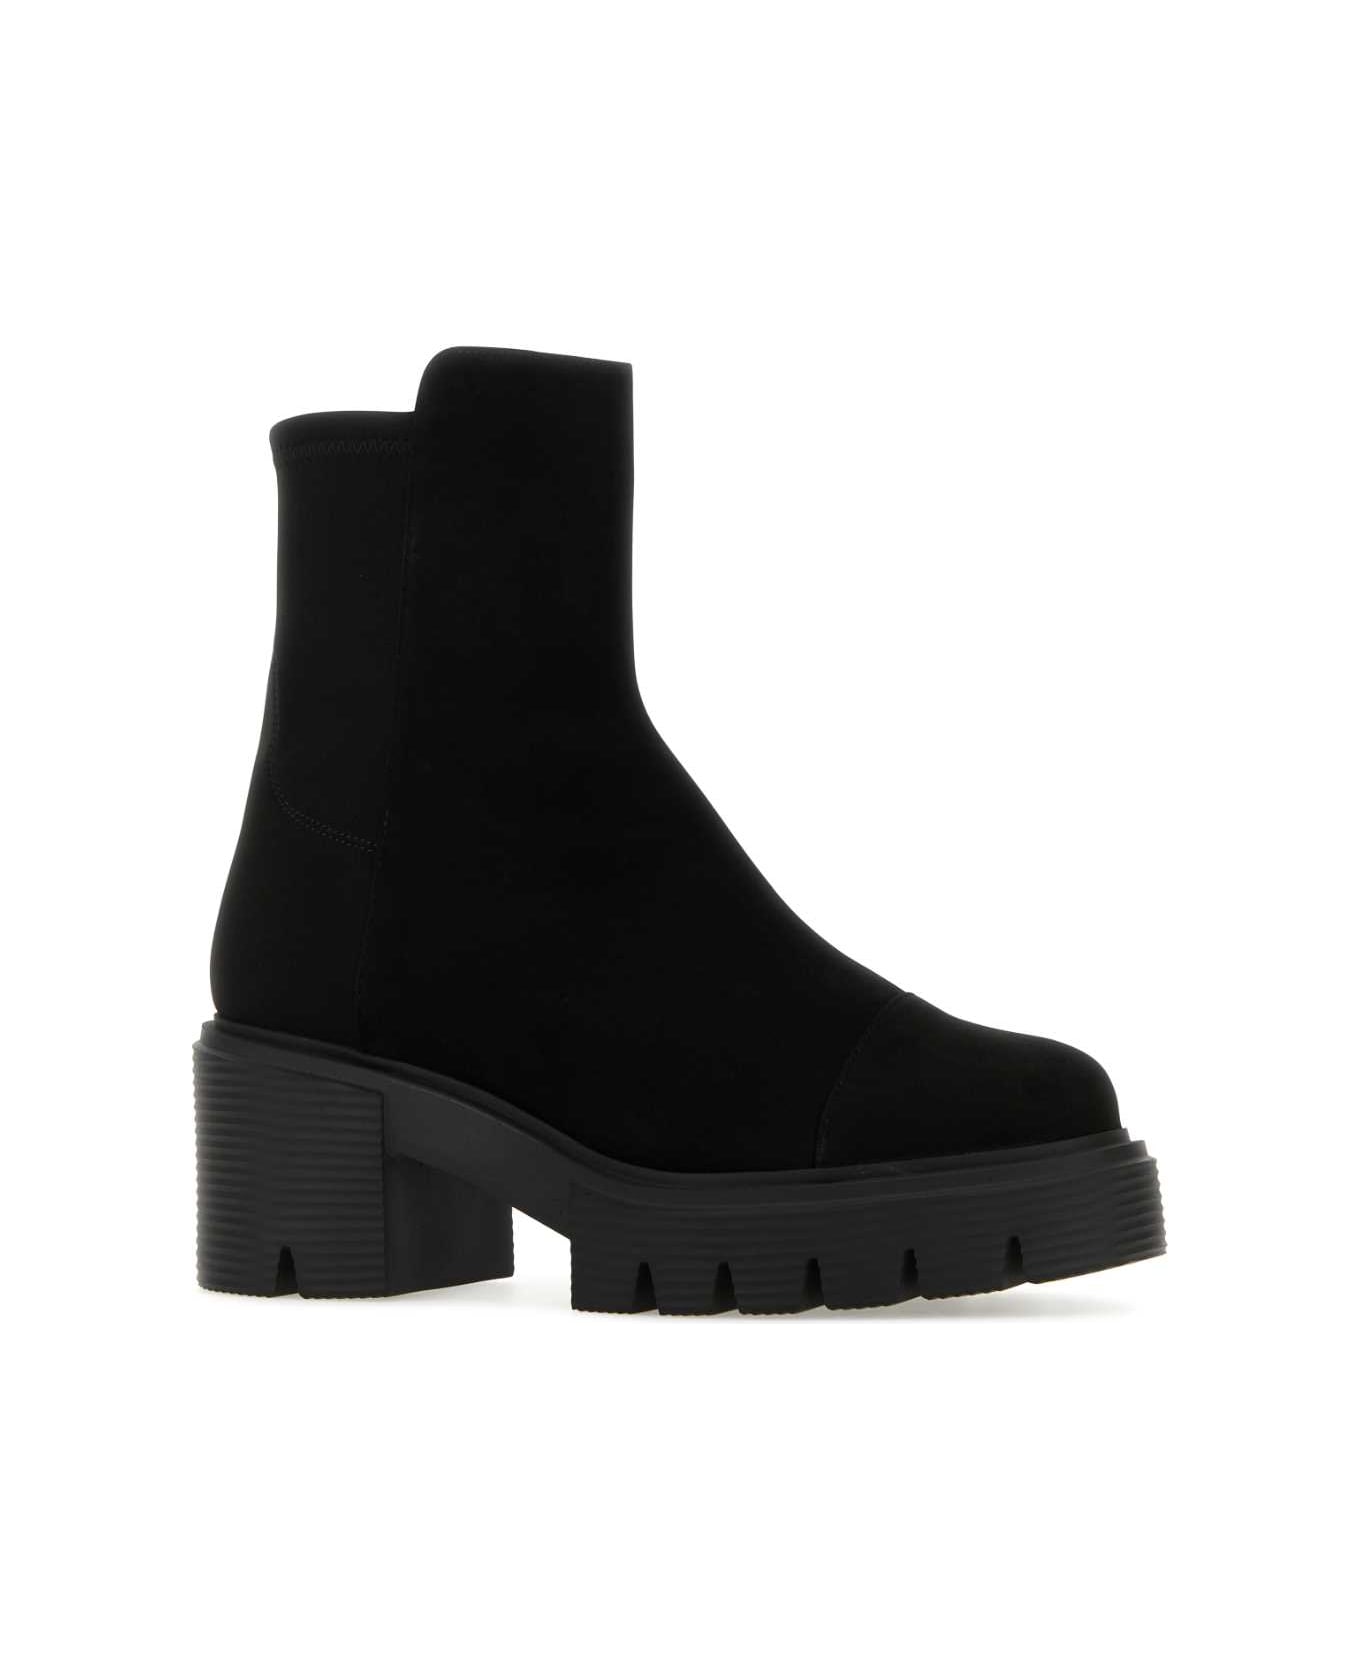 Stuart Weitzman Black Suede And Fabric 5050 Soho Ankle Boots - Black ブーツ